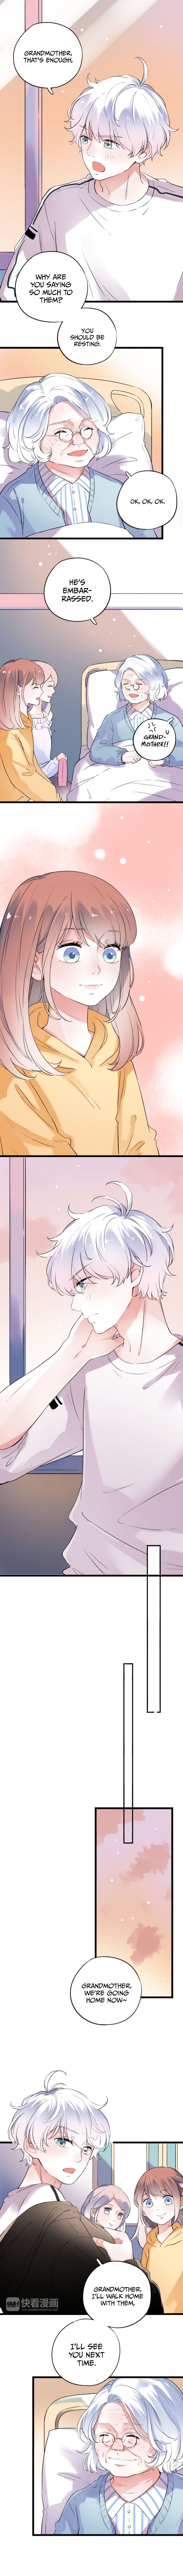 Lonely, Lonely Fireflies Ch. 29.2 He's shy!